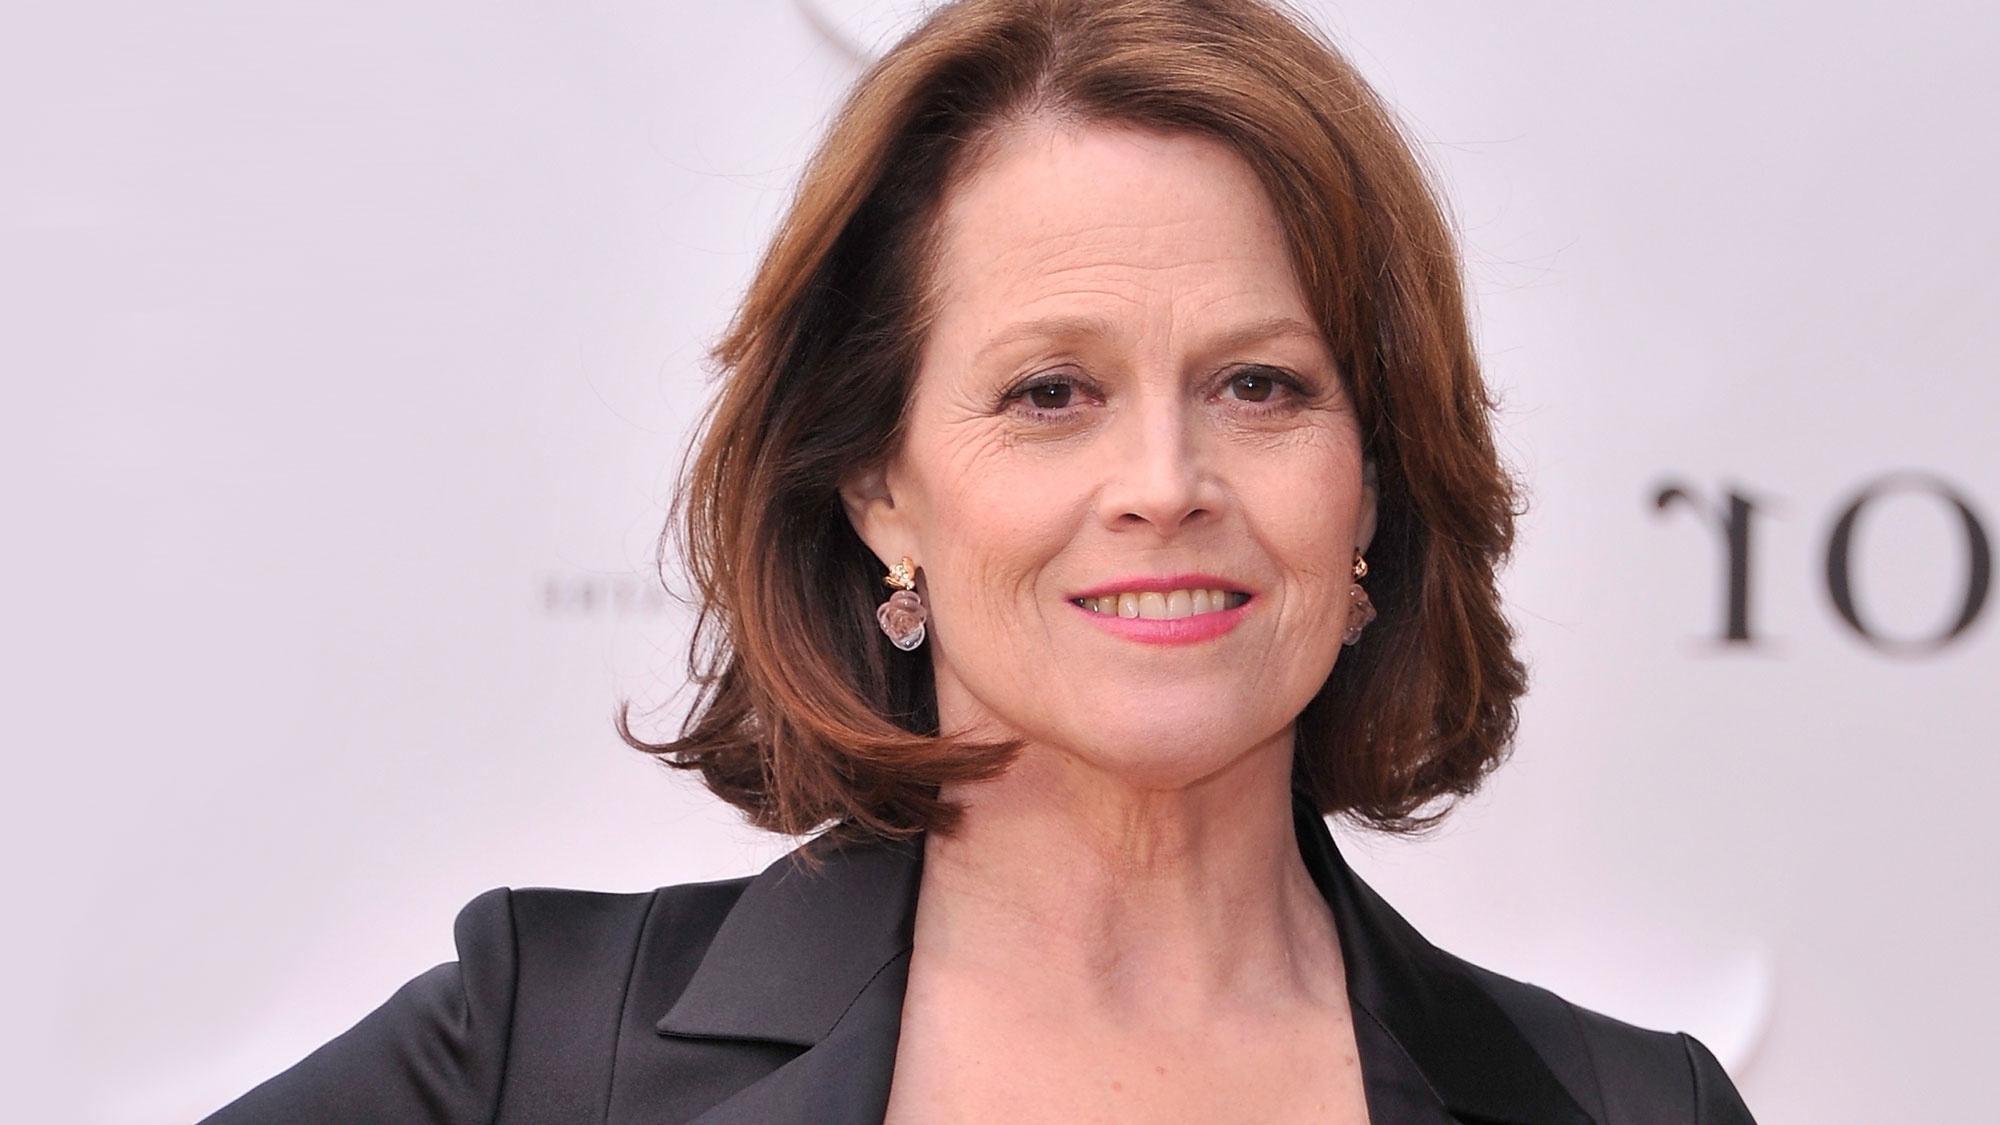 Sigourney Weaver: Known for her extensive voice-over work including the animated films, The Tale of Despereaux and Pixar film WALL-E. 2000x1130 HD Background.